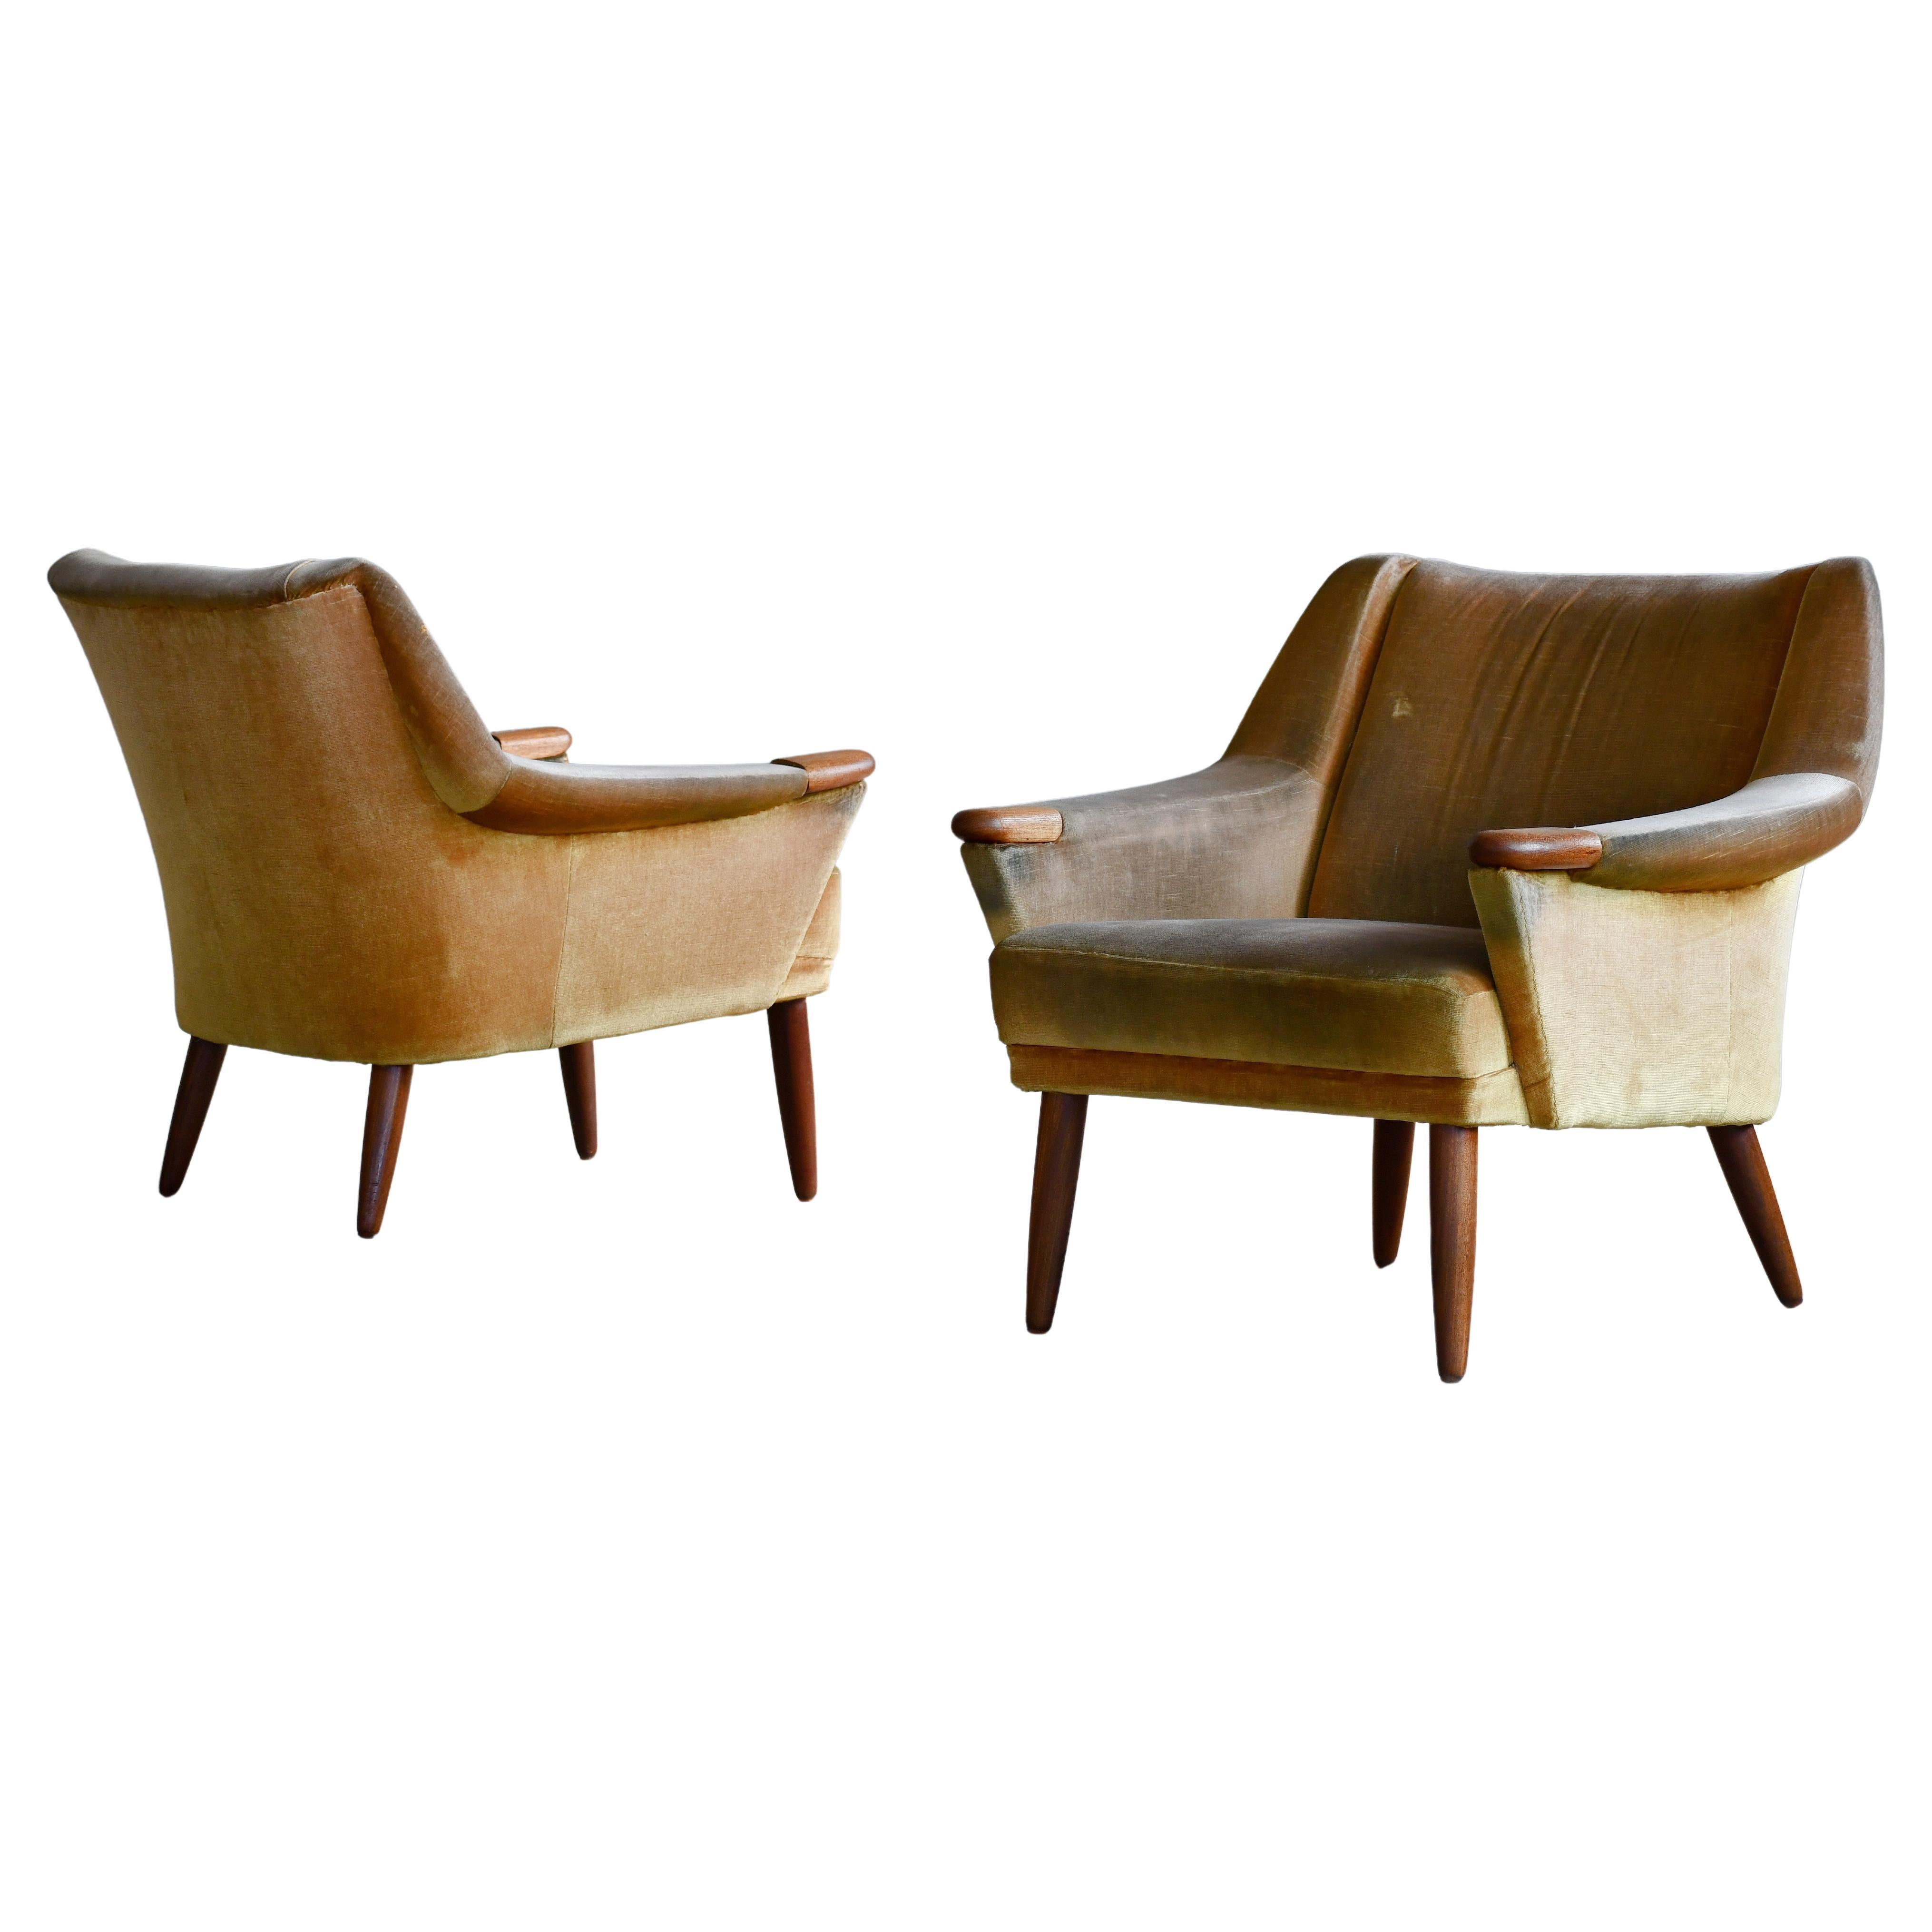 Pair of Danish 1960's Low Lounge chairs with Teak Legs and Accents